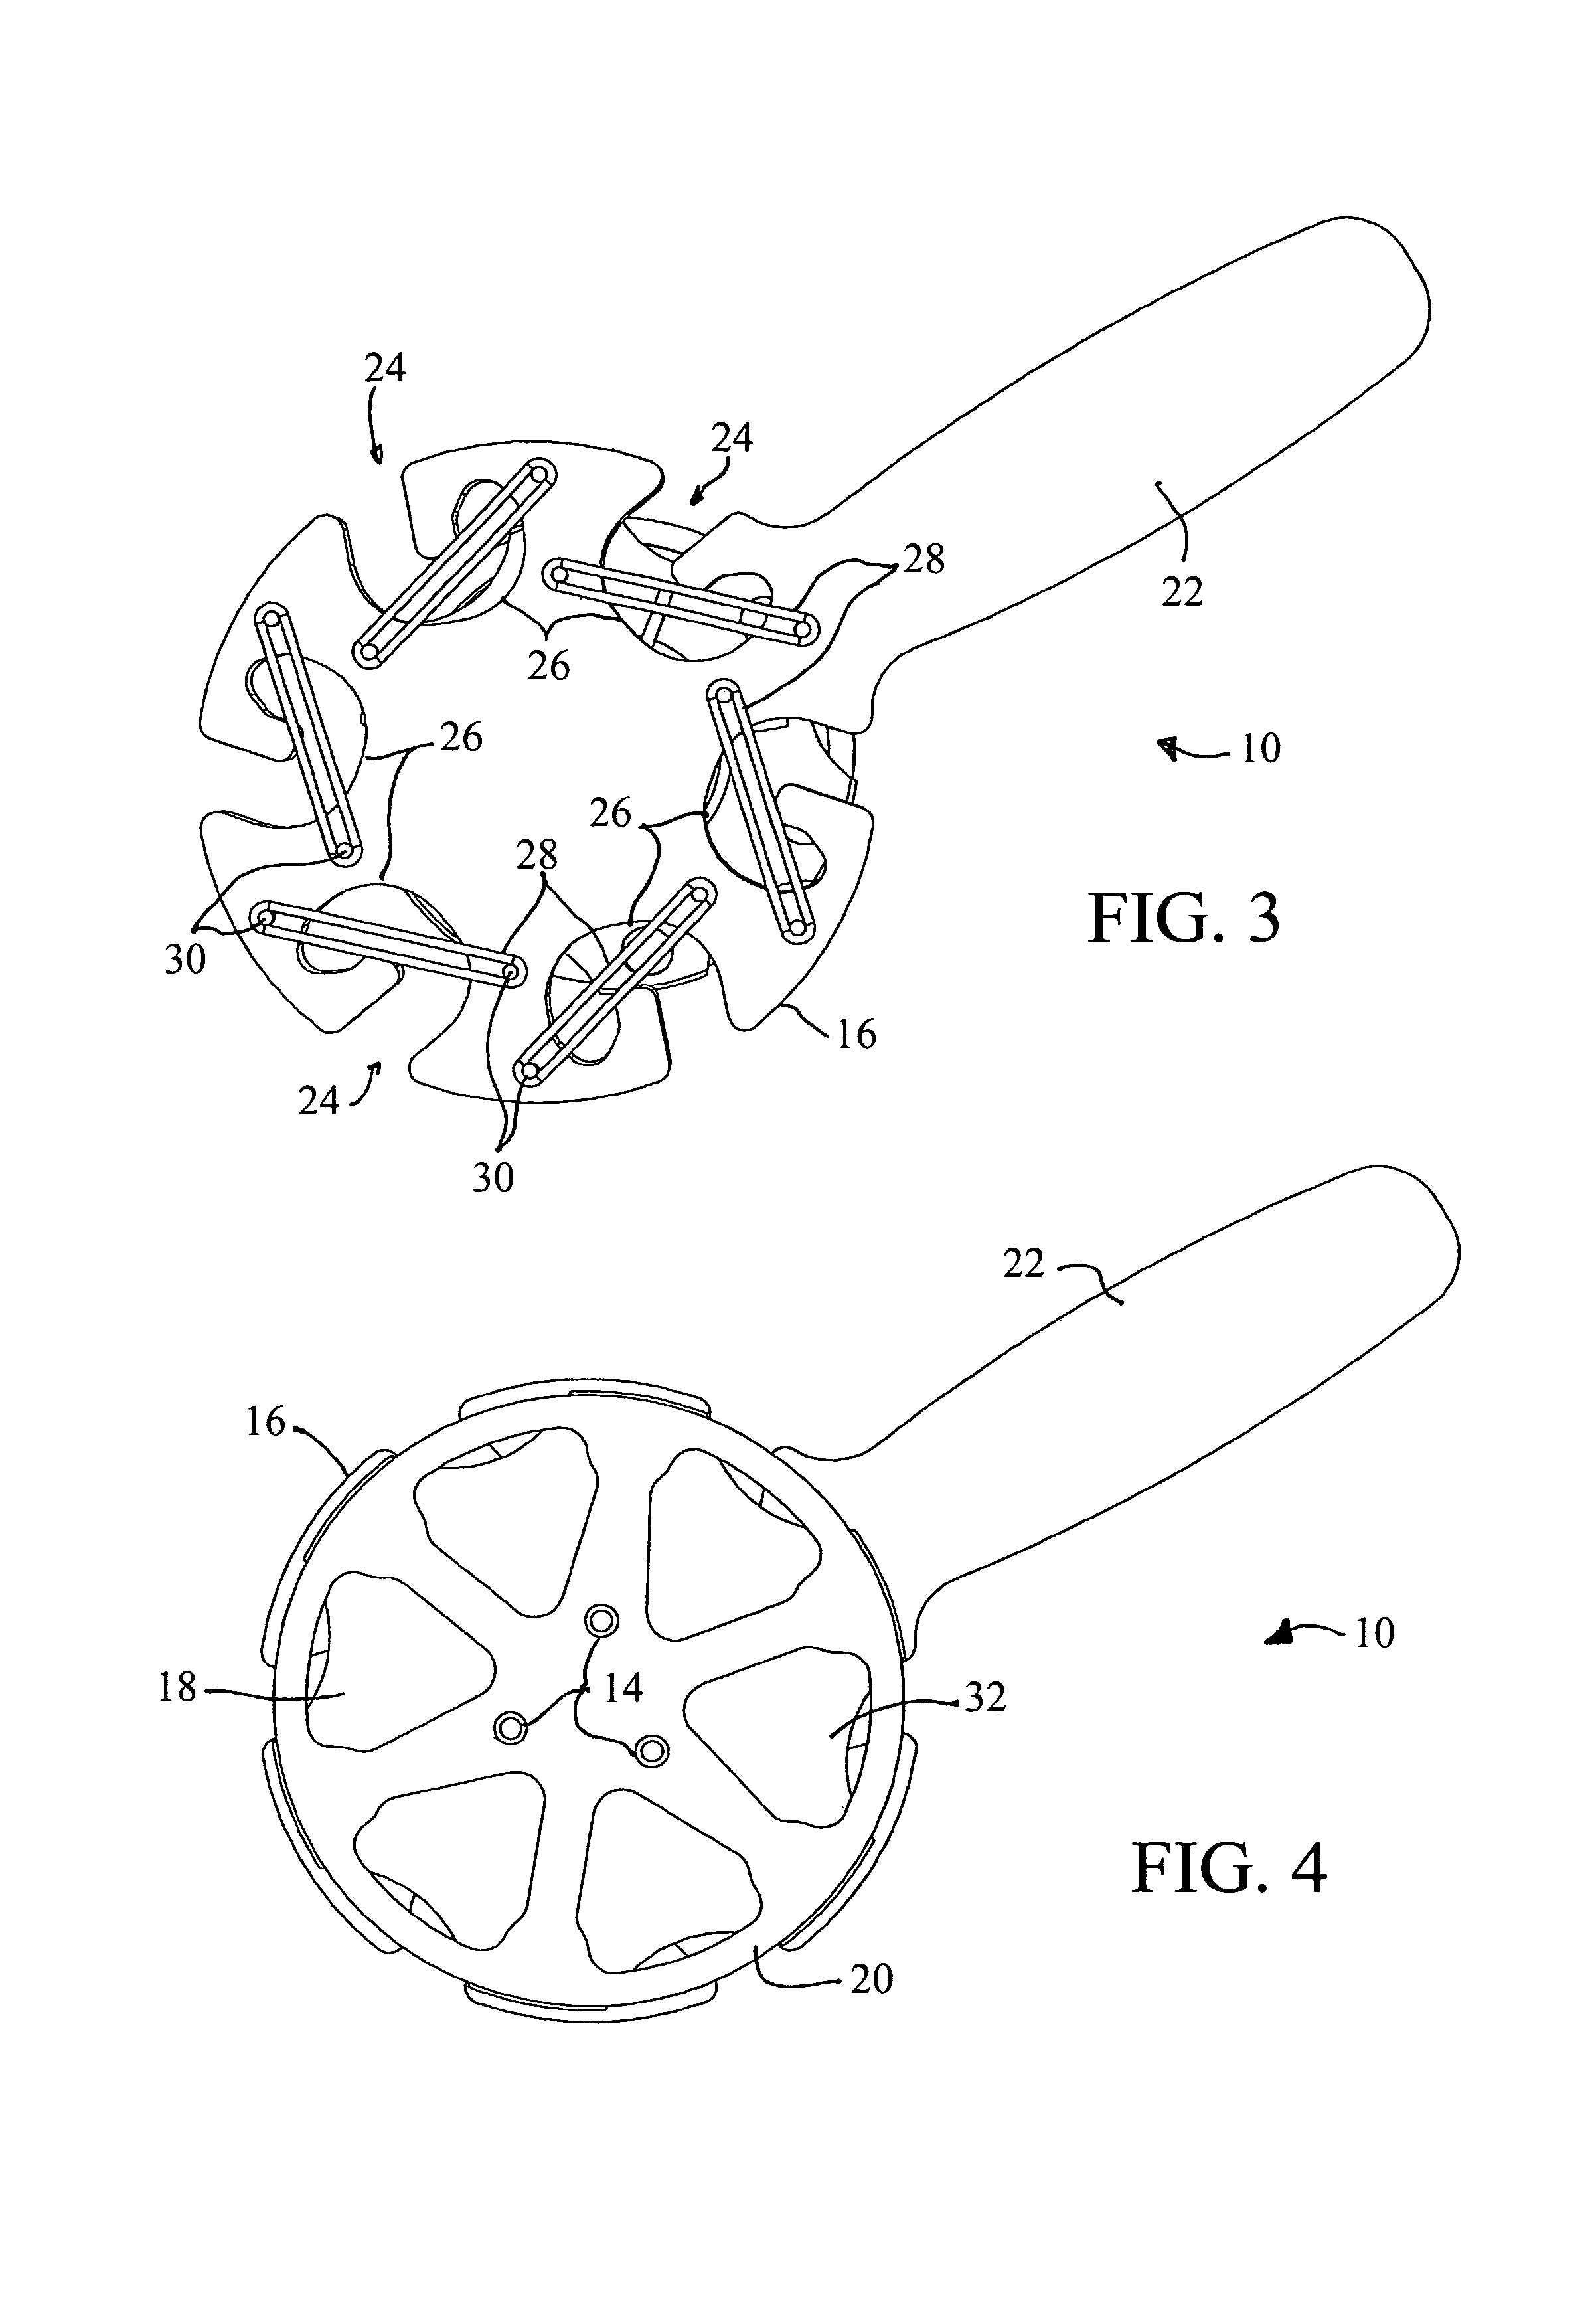 Alignment device and method for applying sleeves to arrow shafts